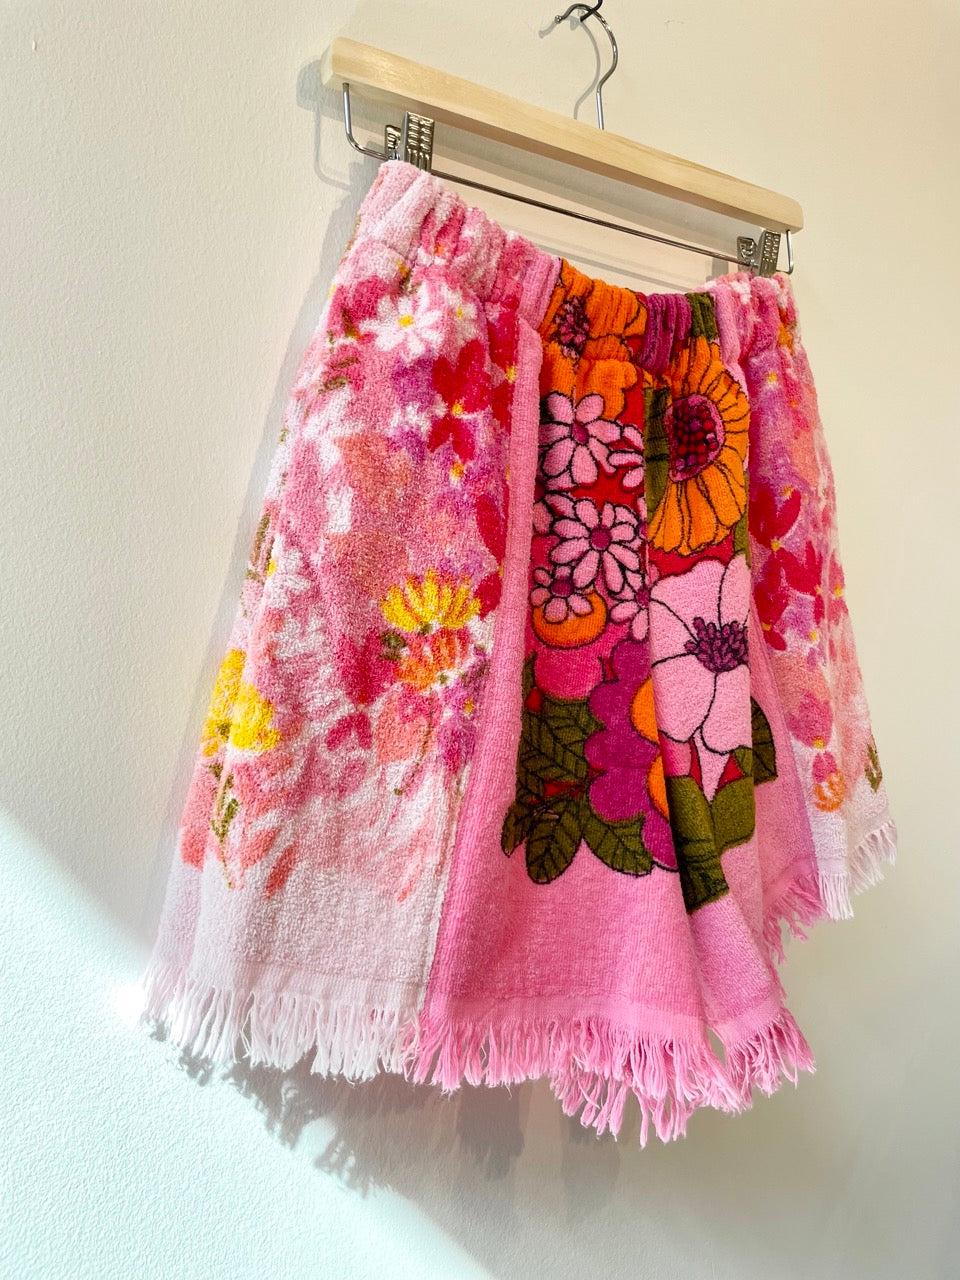 Frottee Shorts pink flower field / S/M